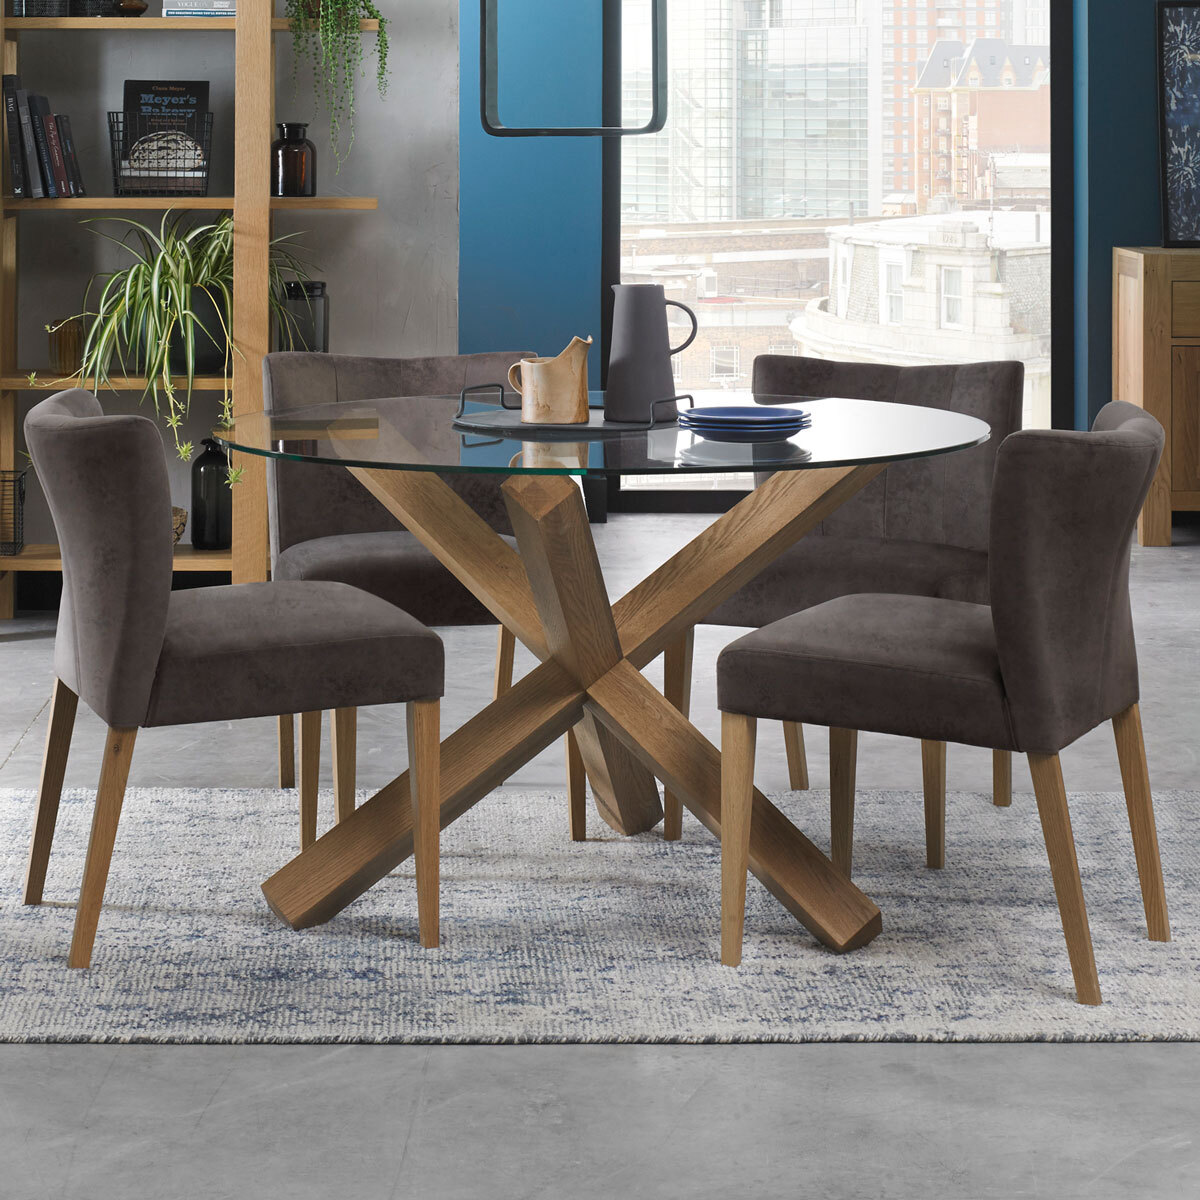 Bentley Designs Turin Glass Top Round, Costco Round Table And Chairs